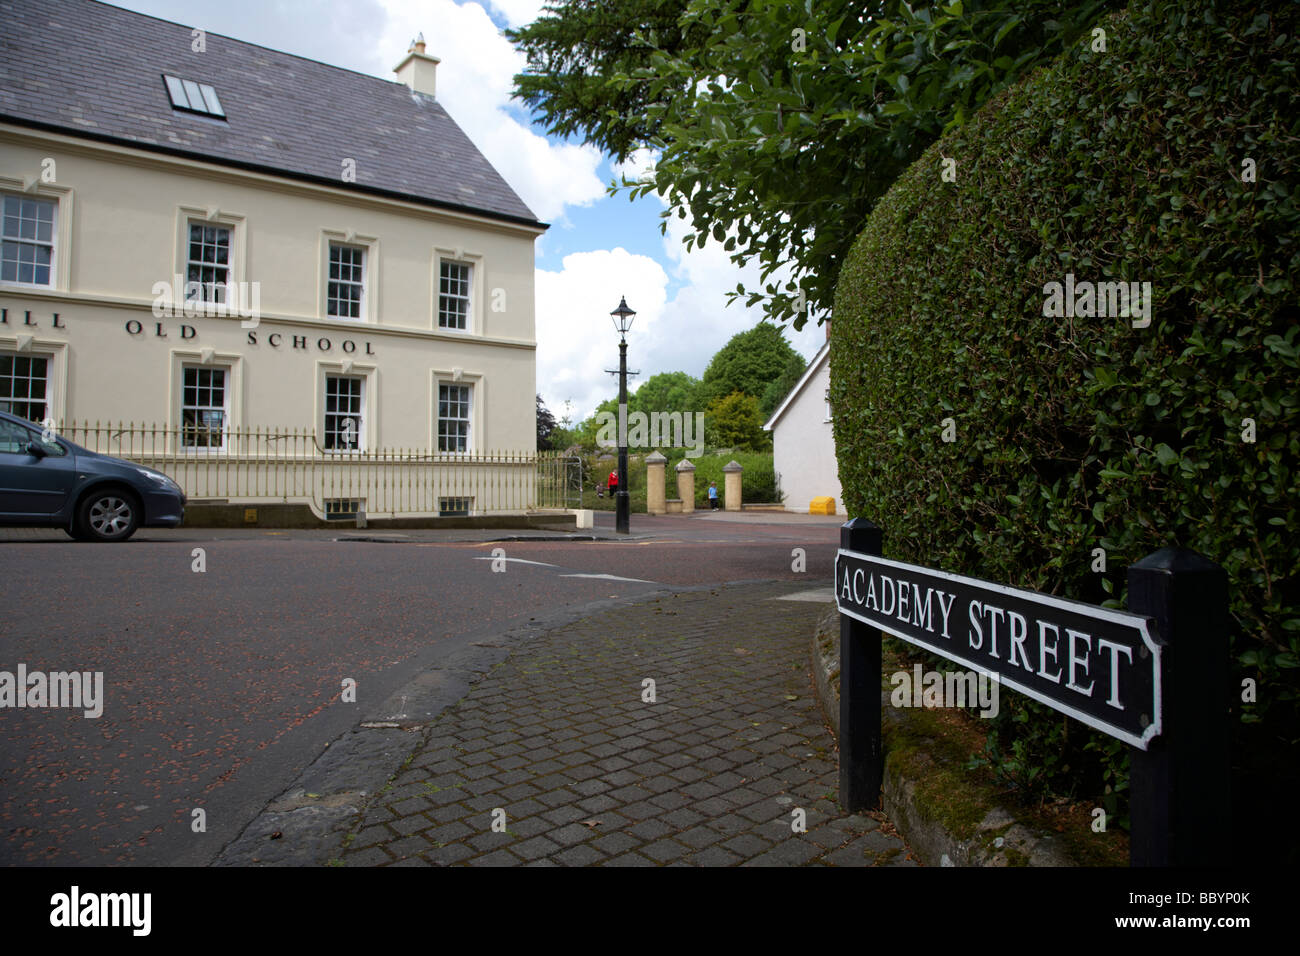 academy street sign and old schoolhouse 18th century gracehill village a moravian settlement in county antrim northern ireland Stock Photo